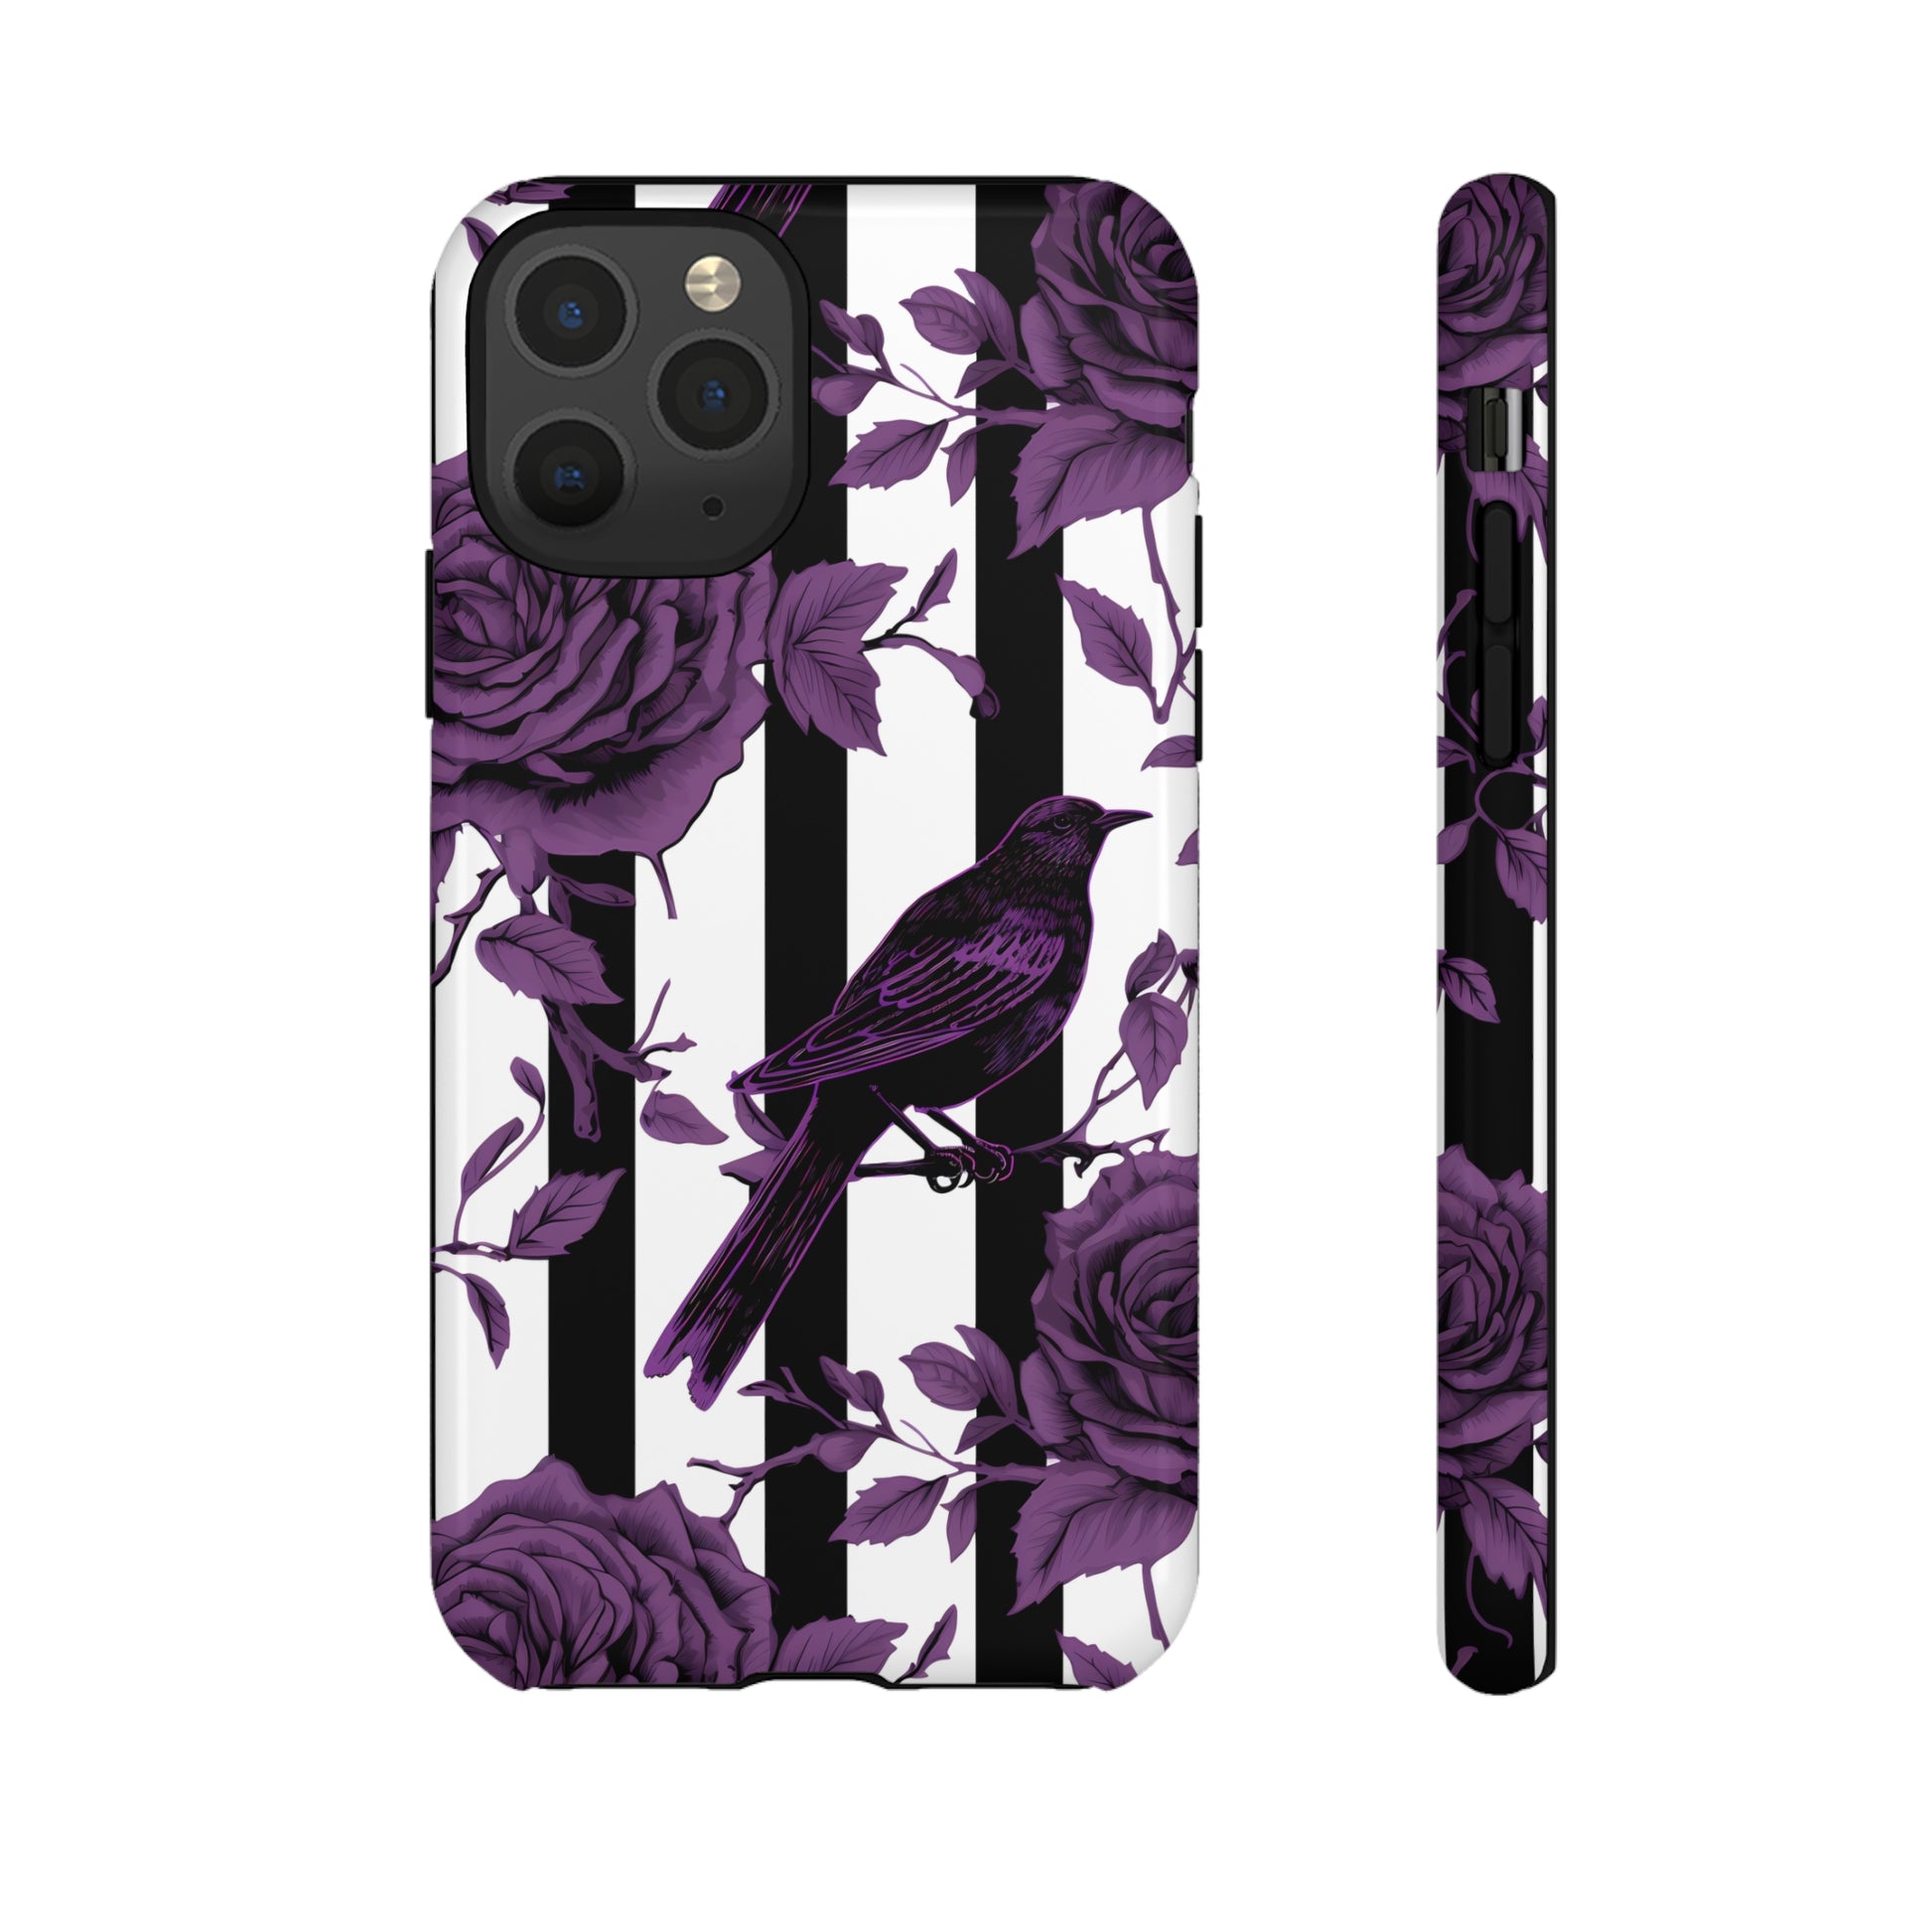 Striped Crows and Roses Tough Cases for iPhone Samsung Google PhonesPhone CaseVTZdesignsiPhone 11 ProGlossyAccessoriescrowsGlossy